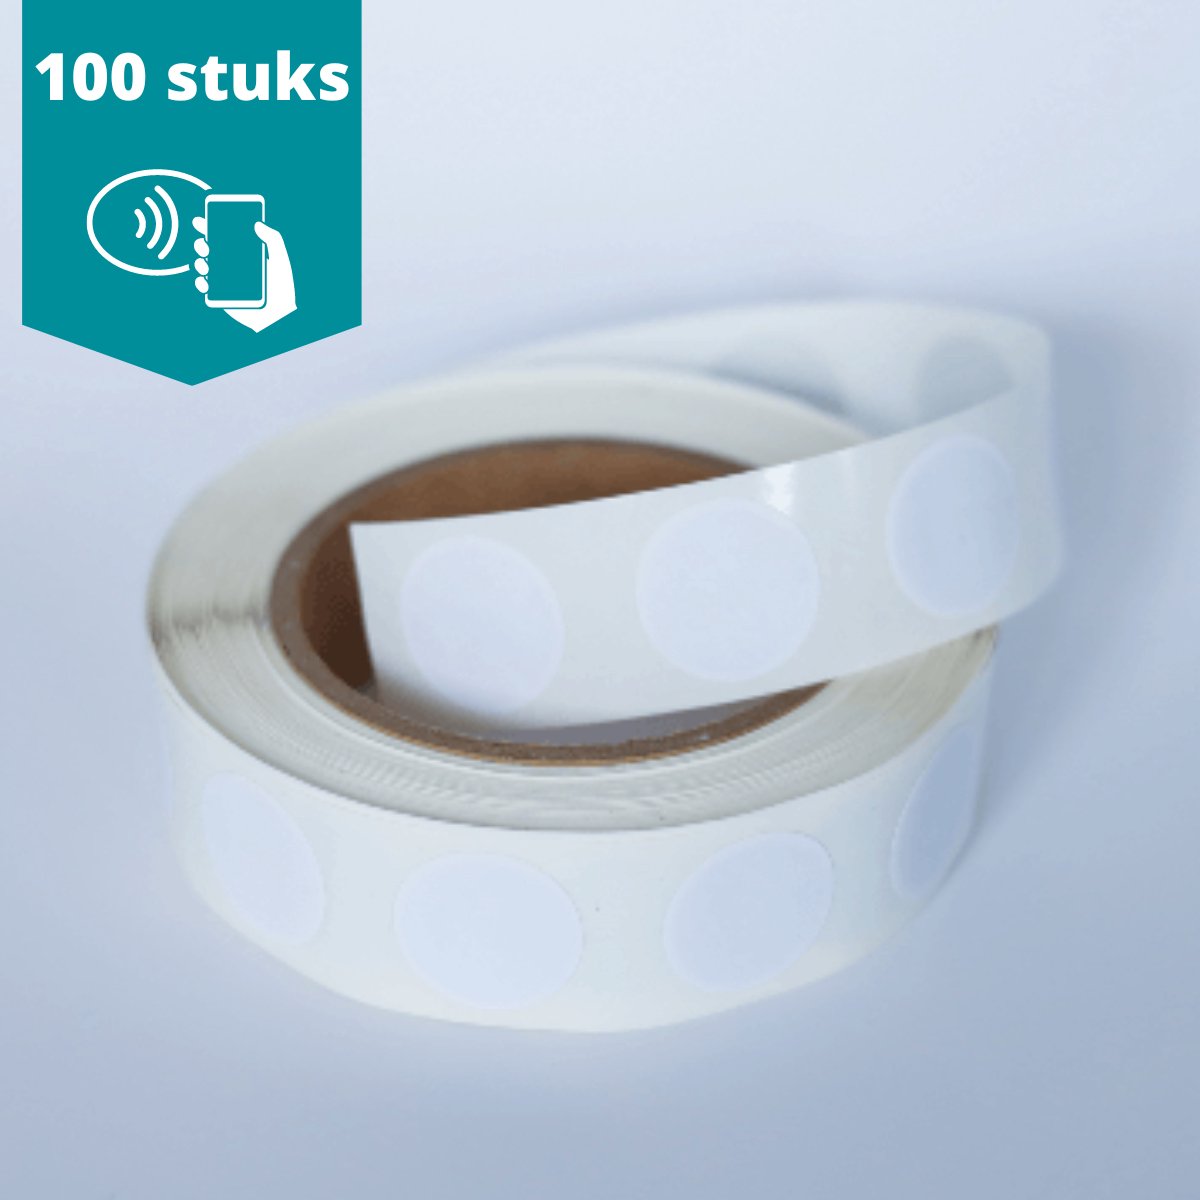 NTAG215 NFC Tags Stickers (100 STUKS) voor Amiibo - Amiibo compatible - RFID - iPhone & Android - NFC stickers - Stickervel - NFC chip - NTAG215 - RFID Tag - NFC 215 - NFC Tag - Tagmo